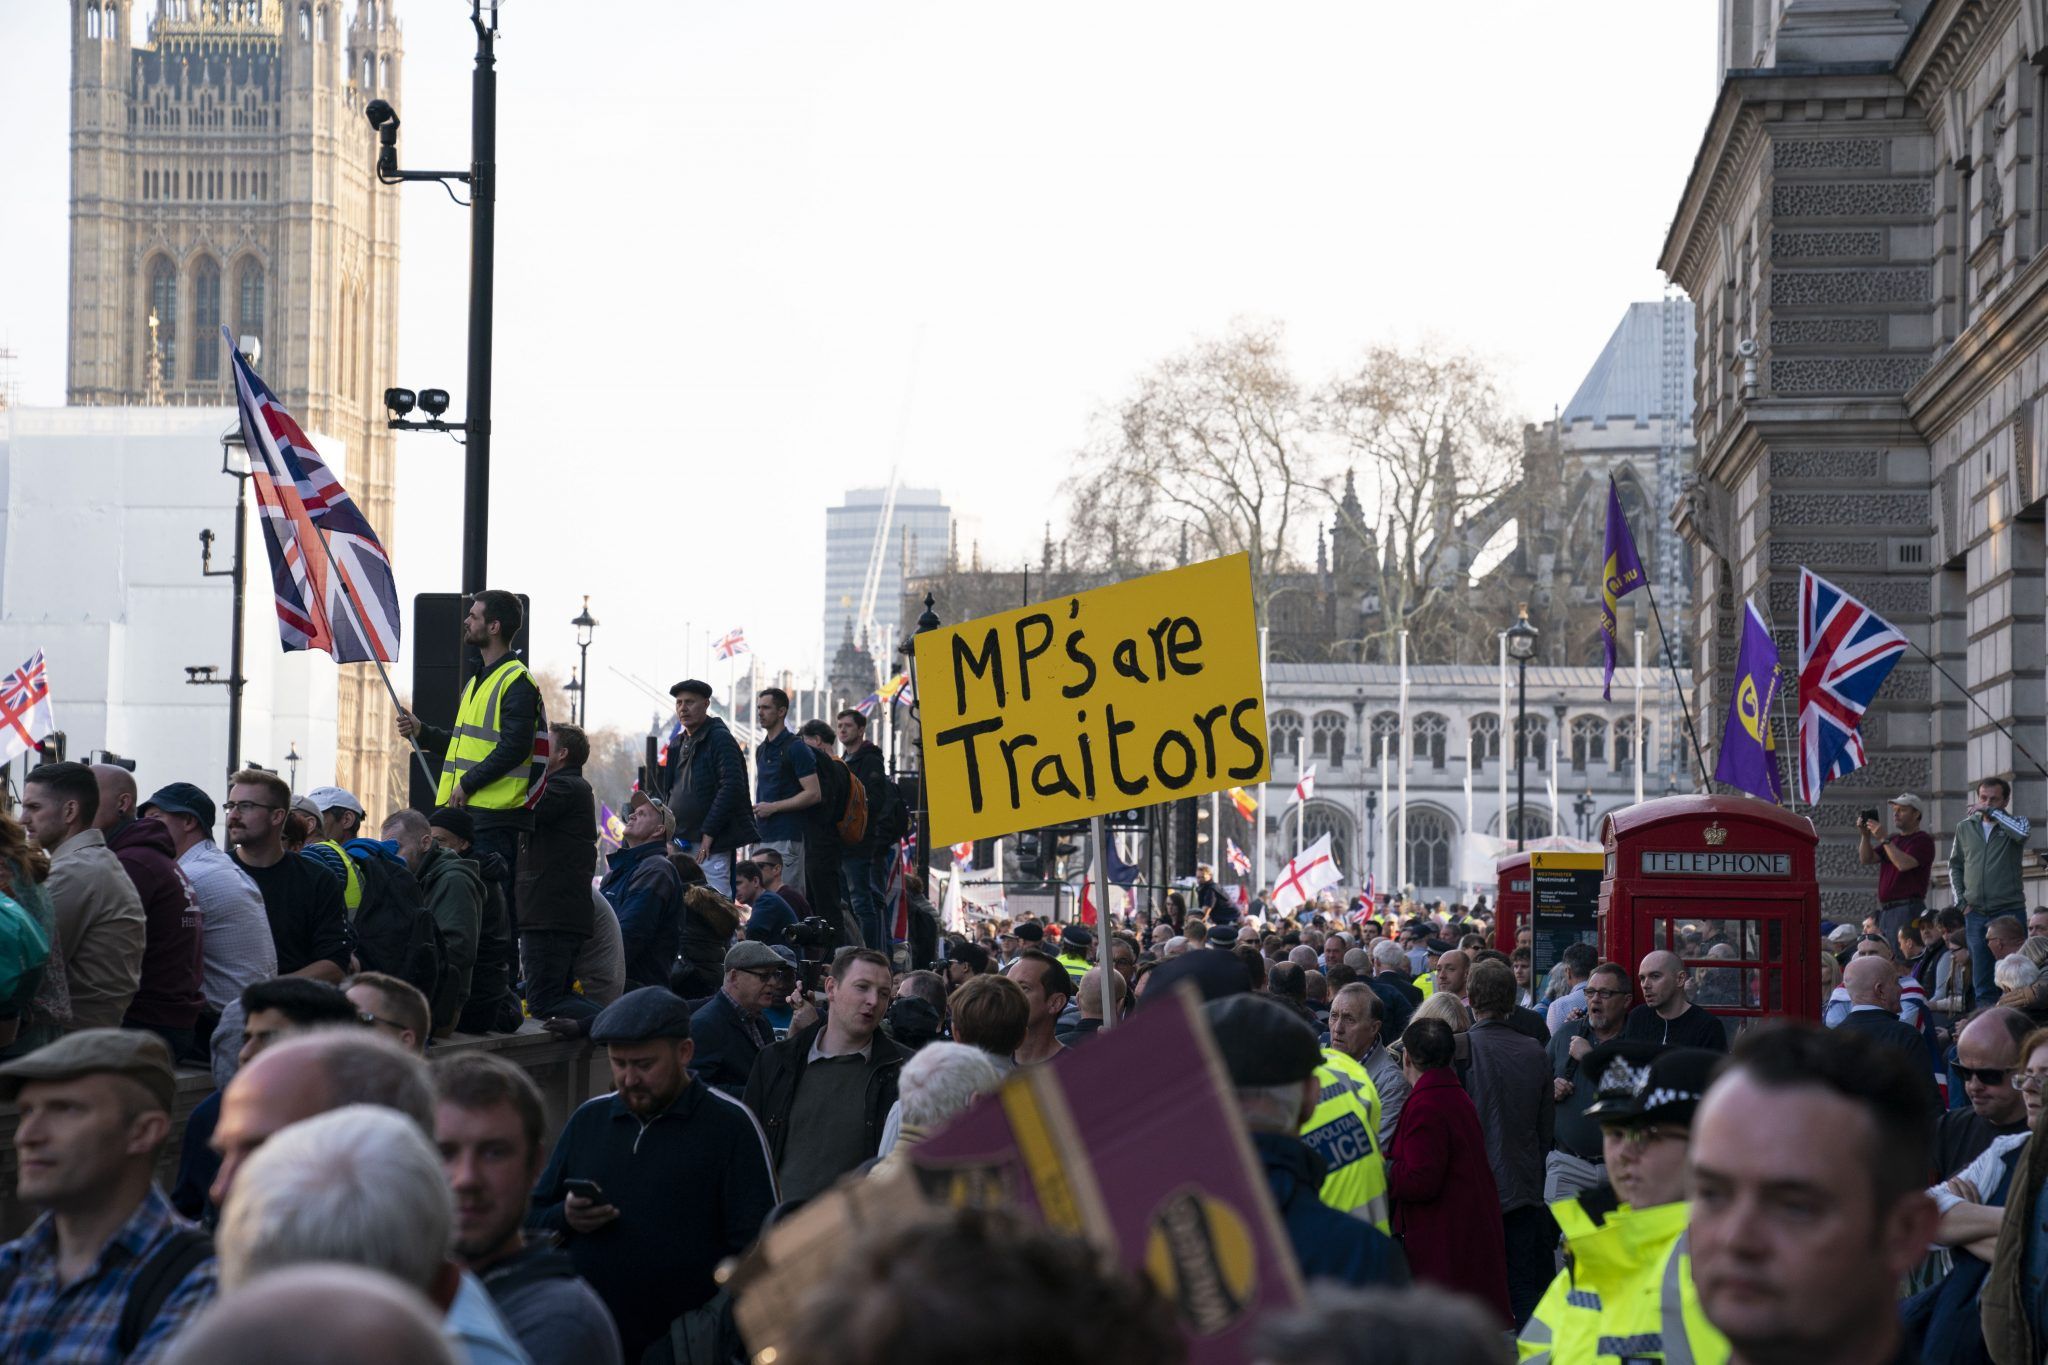 On March 29 people descended on Westminster to protest the government's handling of Brexit (Credit: Getty)